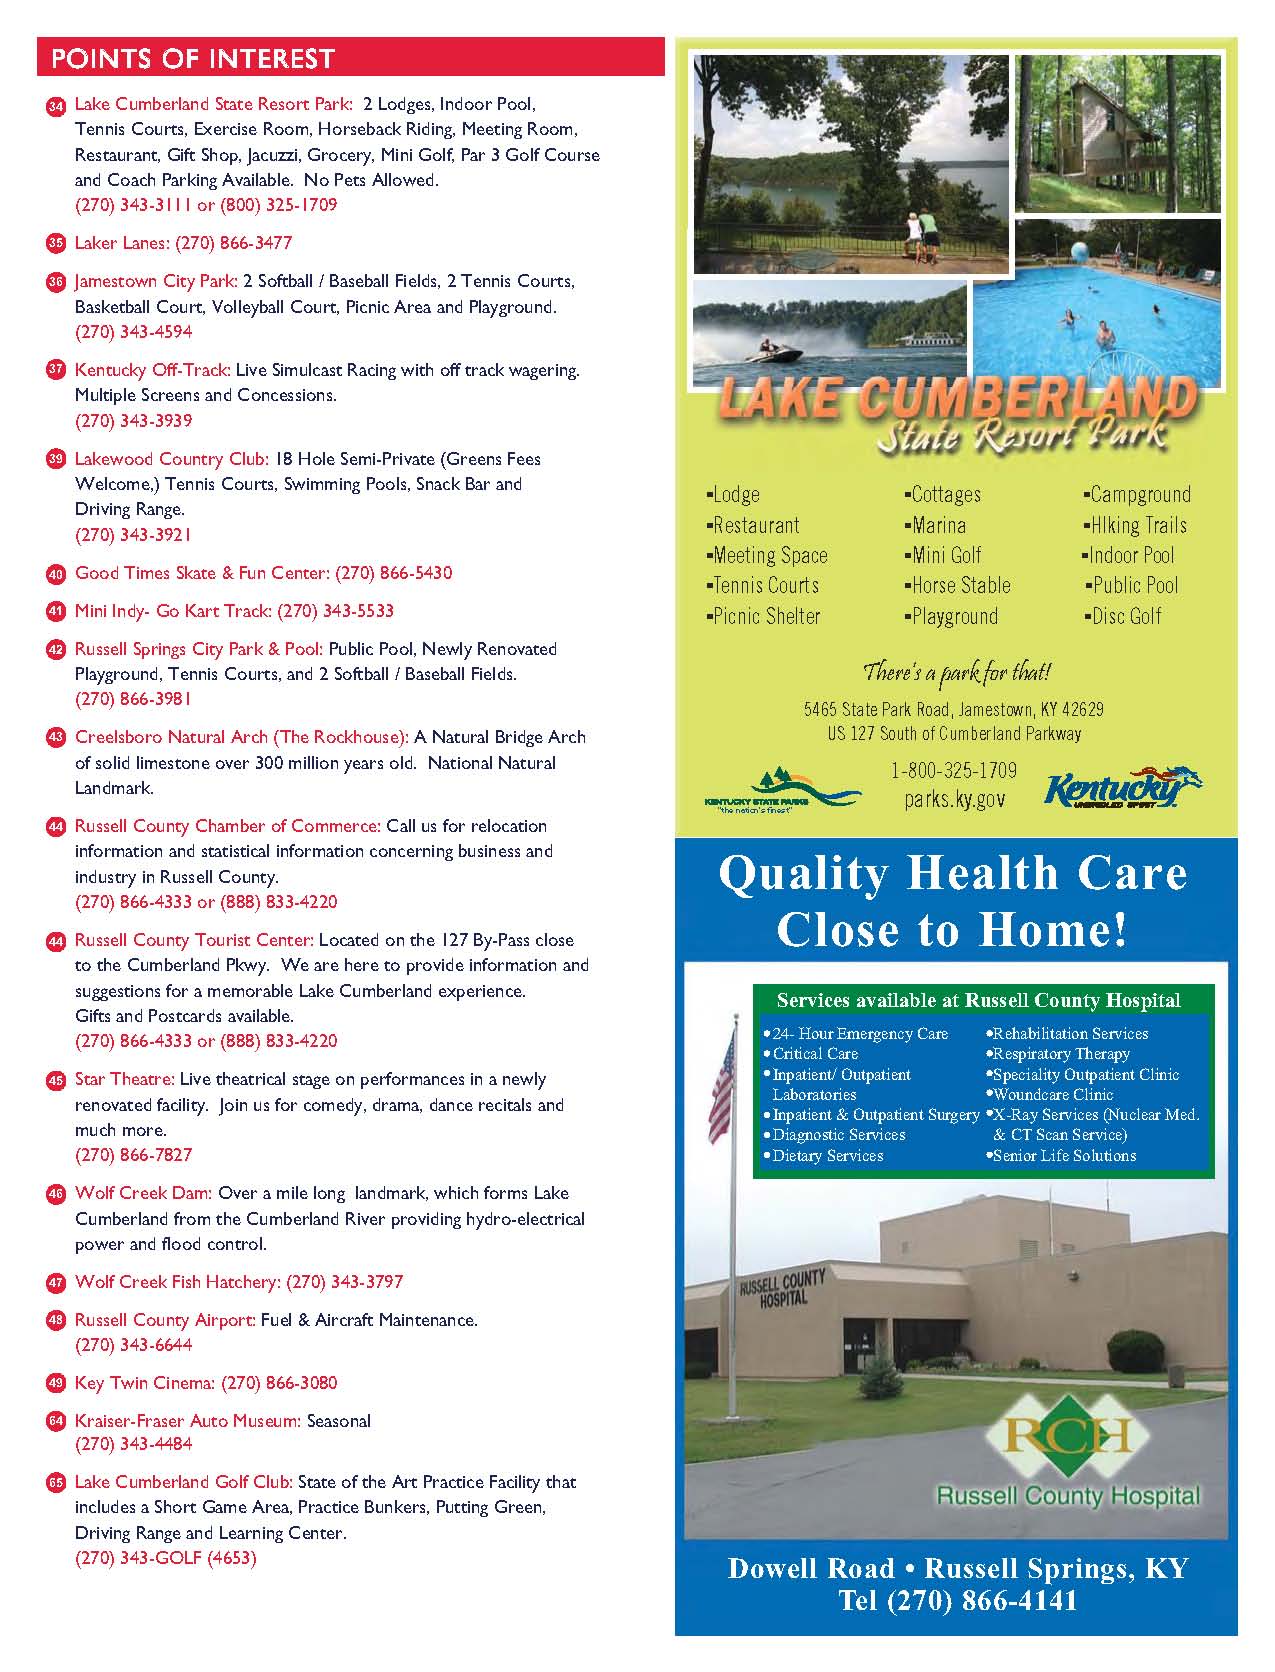 visitor-guide2013-web_Page_16.jpg